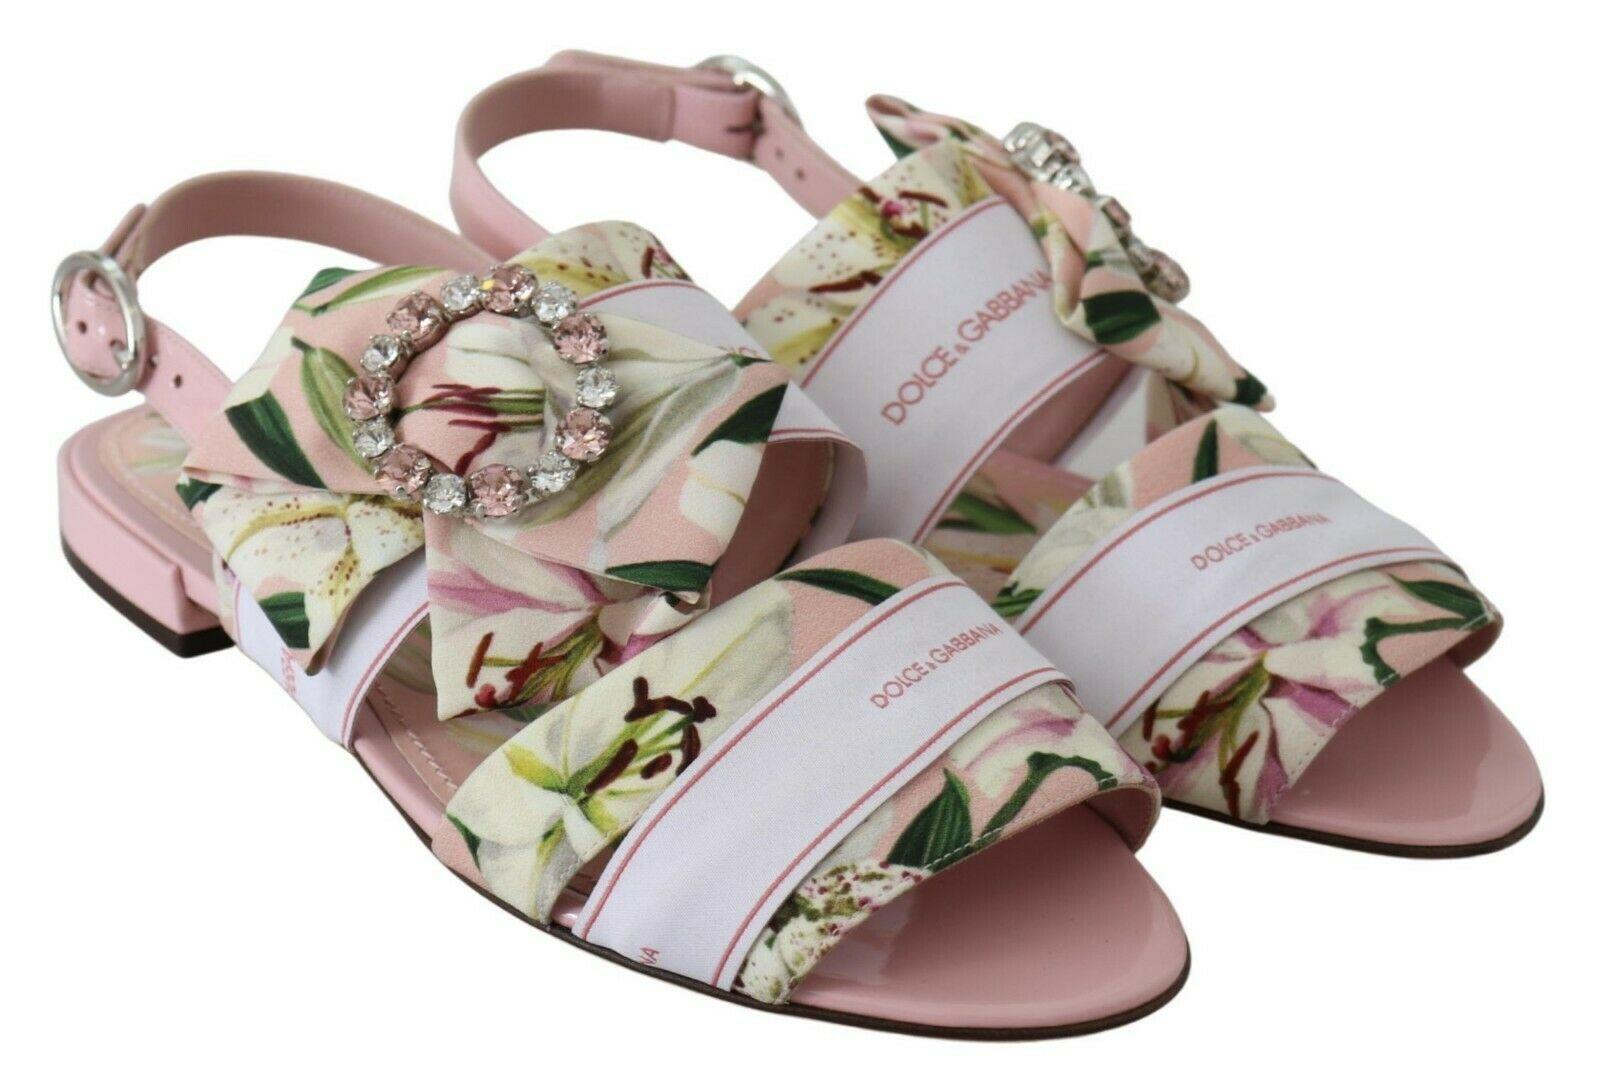 Brown Dolce & Gabbana Pink Silk Floral Lily Bianca Flats Shoes Sandals Crystals DG